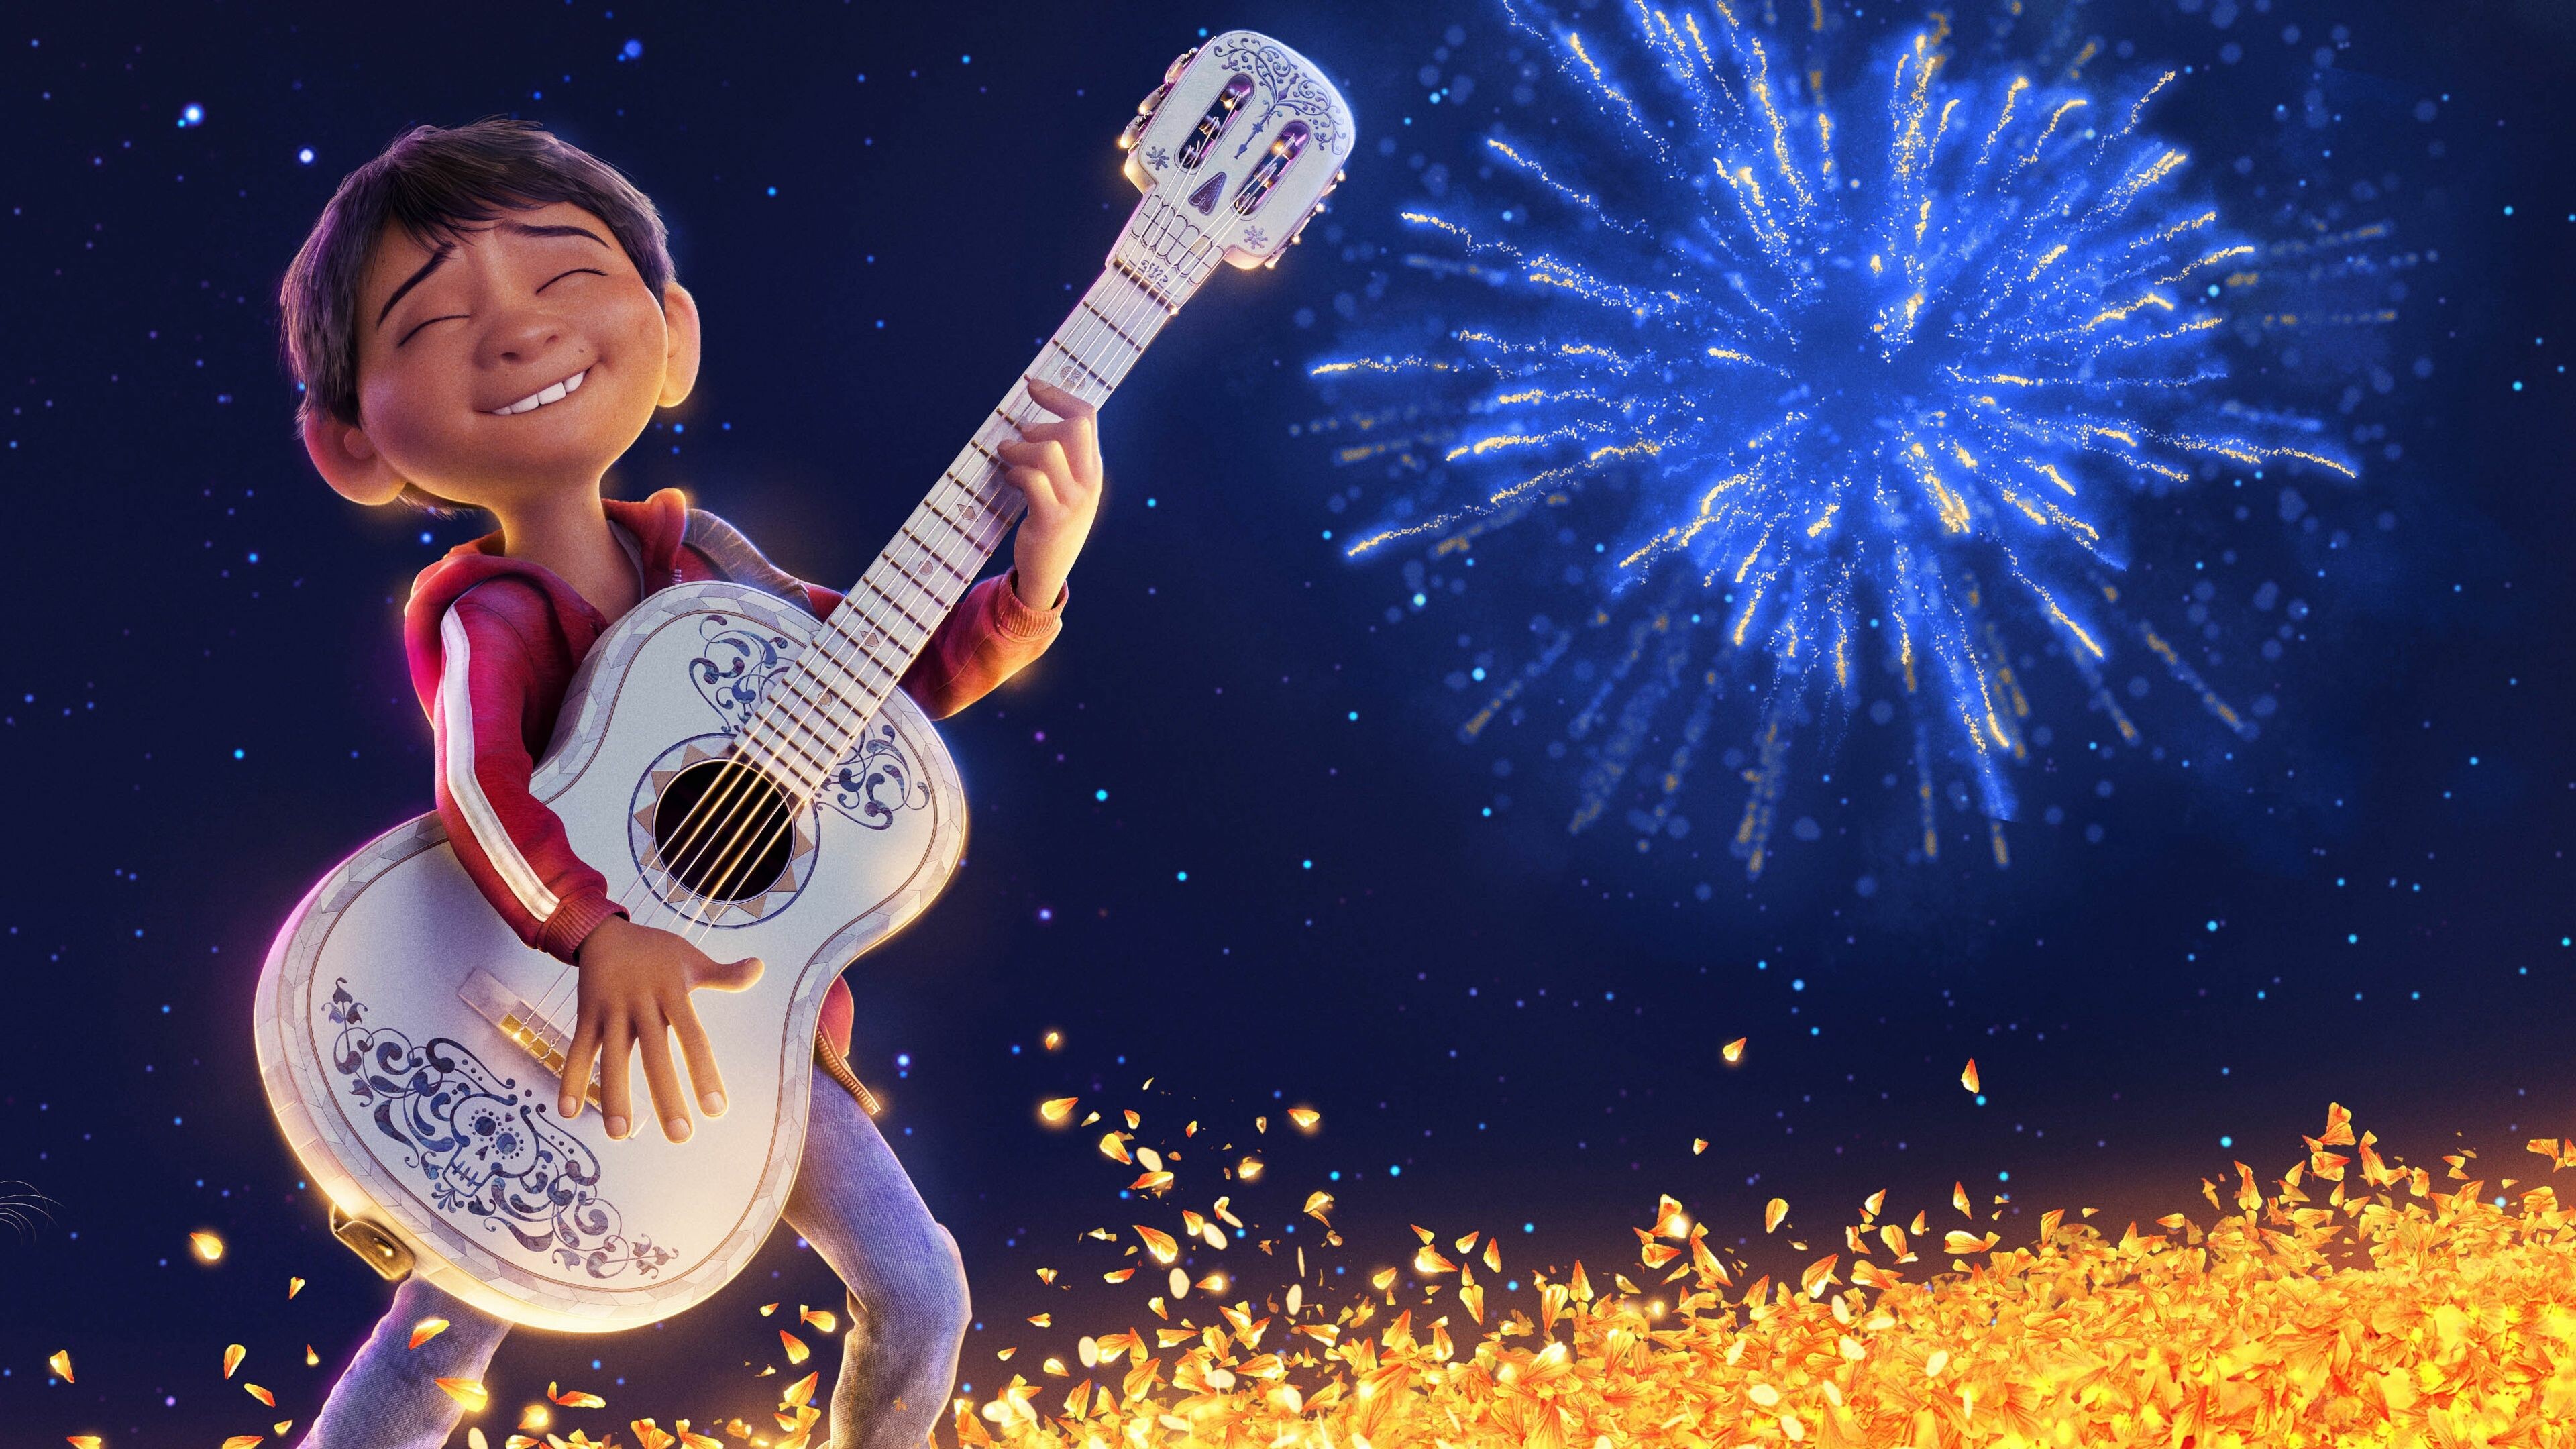 Coco (Cartoon): Anthony Gonzalez as Miguel, a 12-year-old aspiring musician. 3840x2160 4K Background.